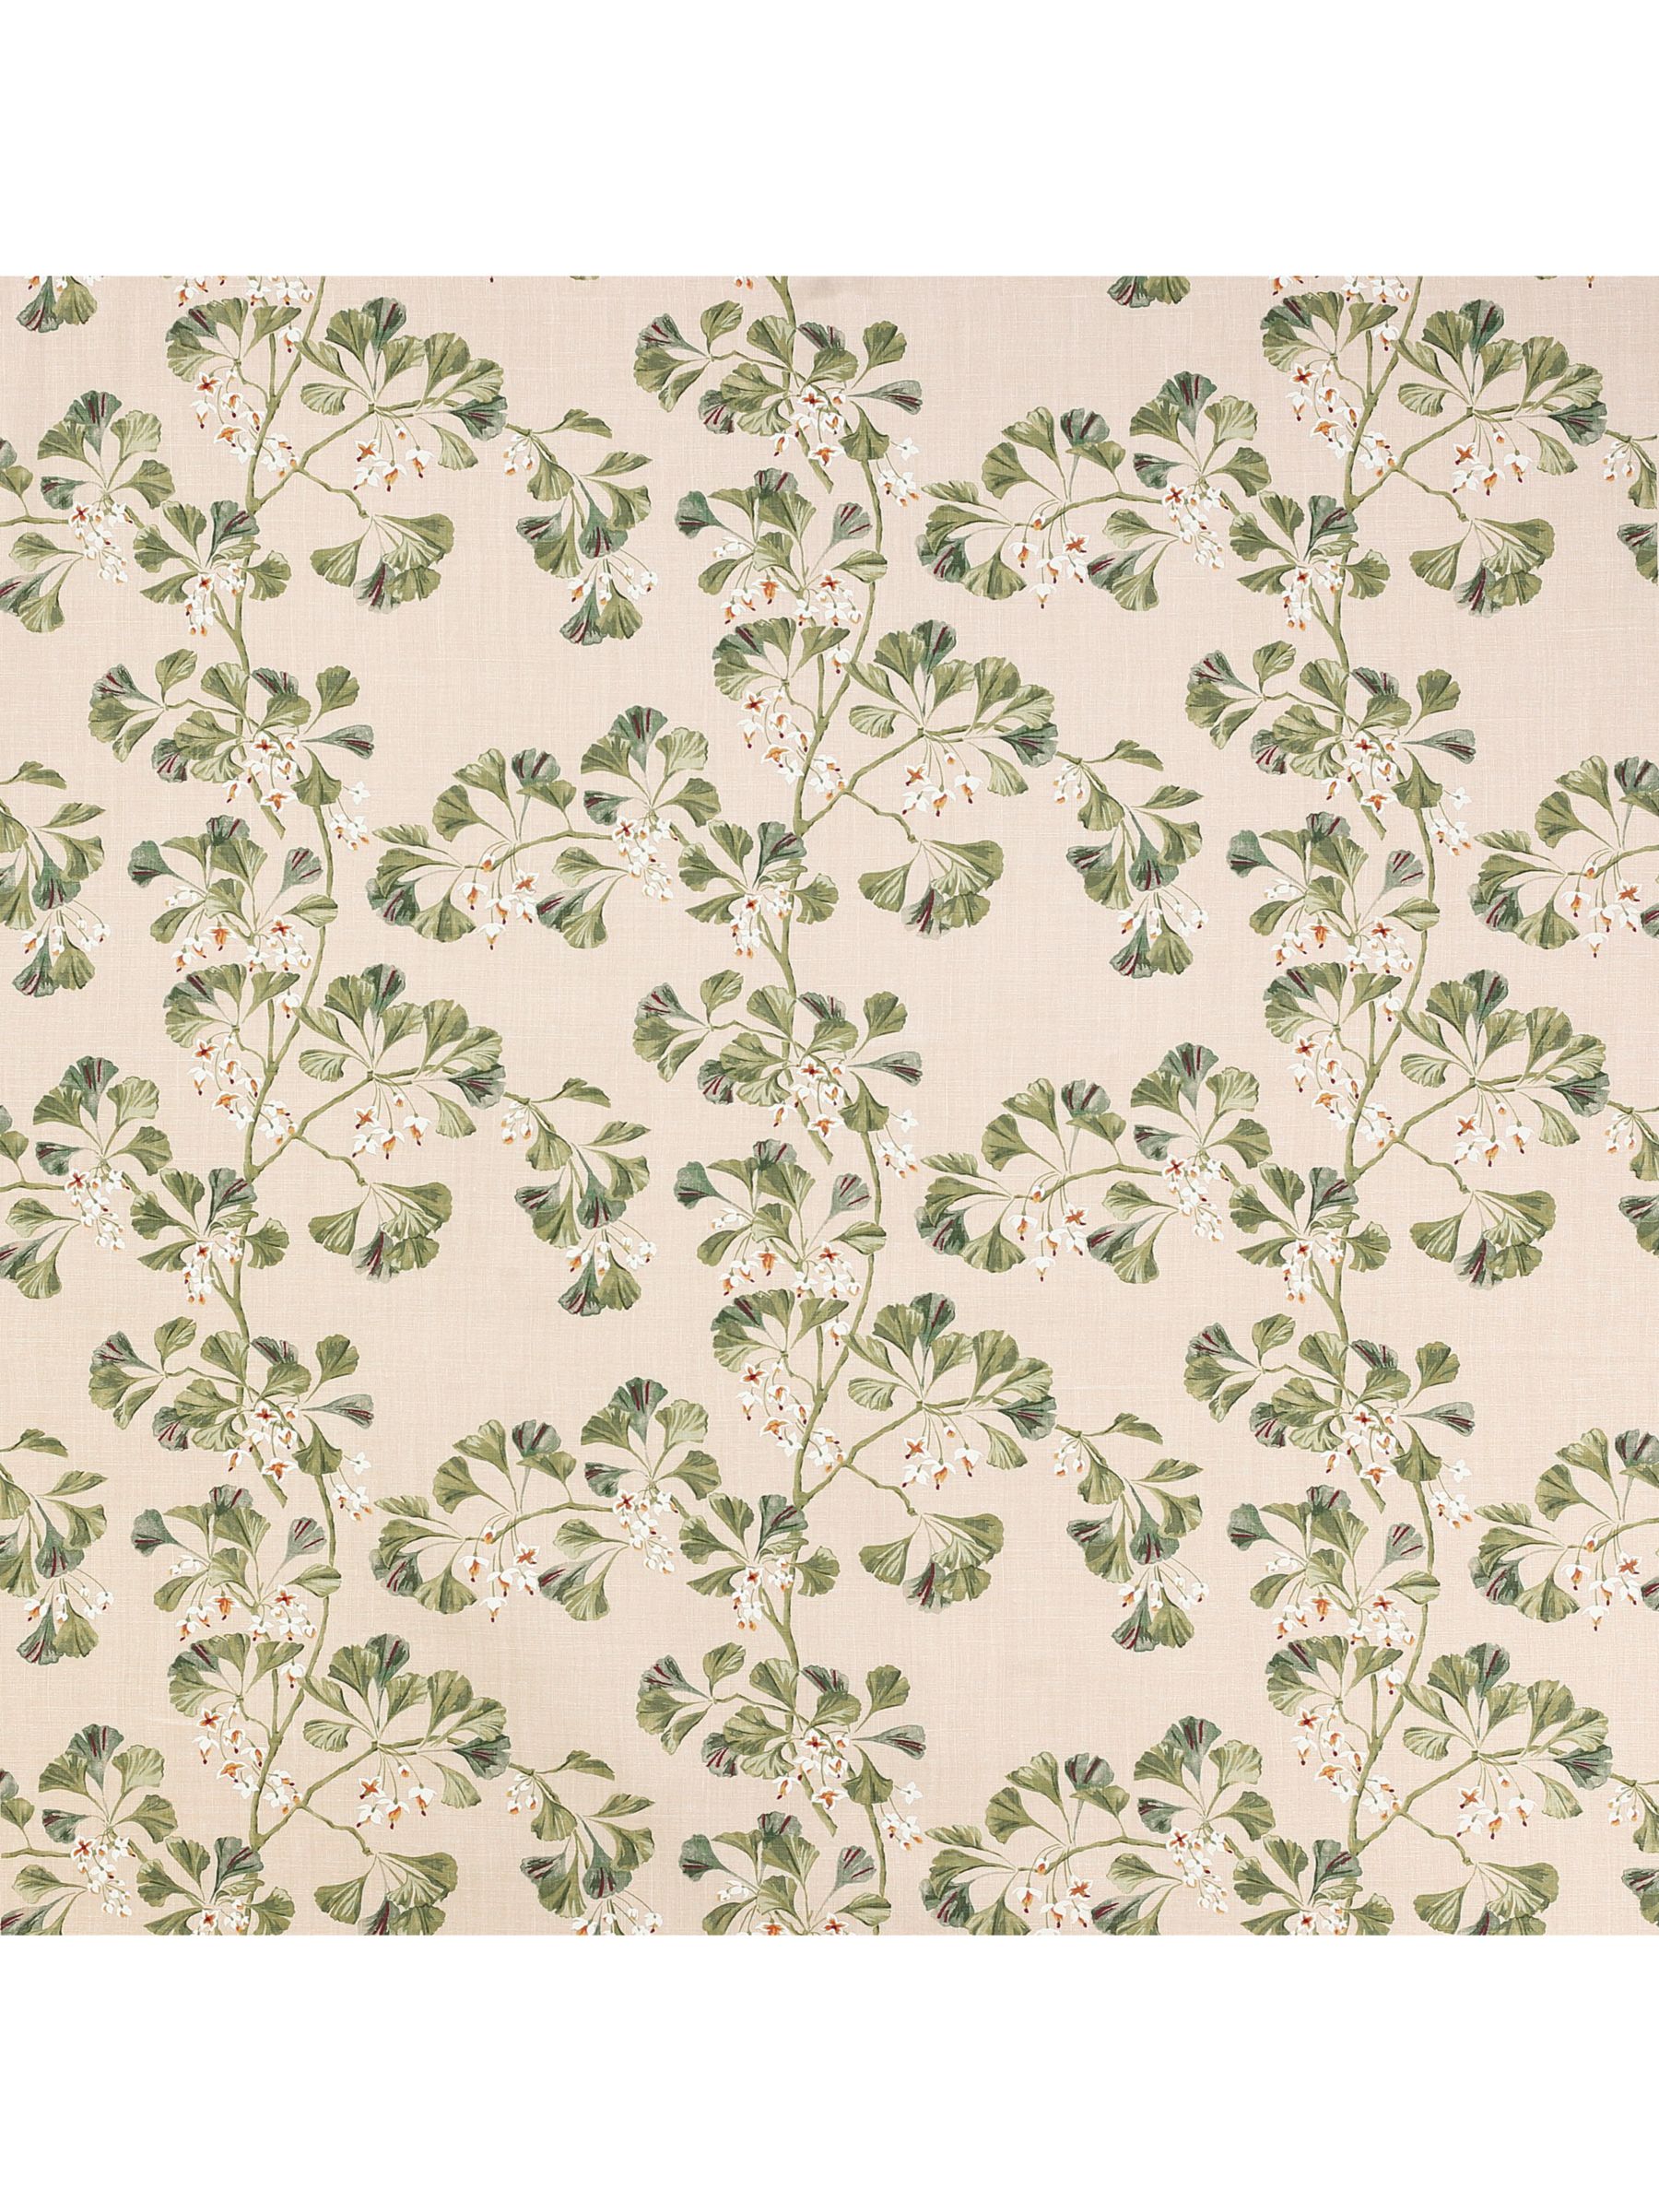 Colefax and Fowler Greenacre Furnishing Fabric, Forest Green